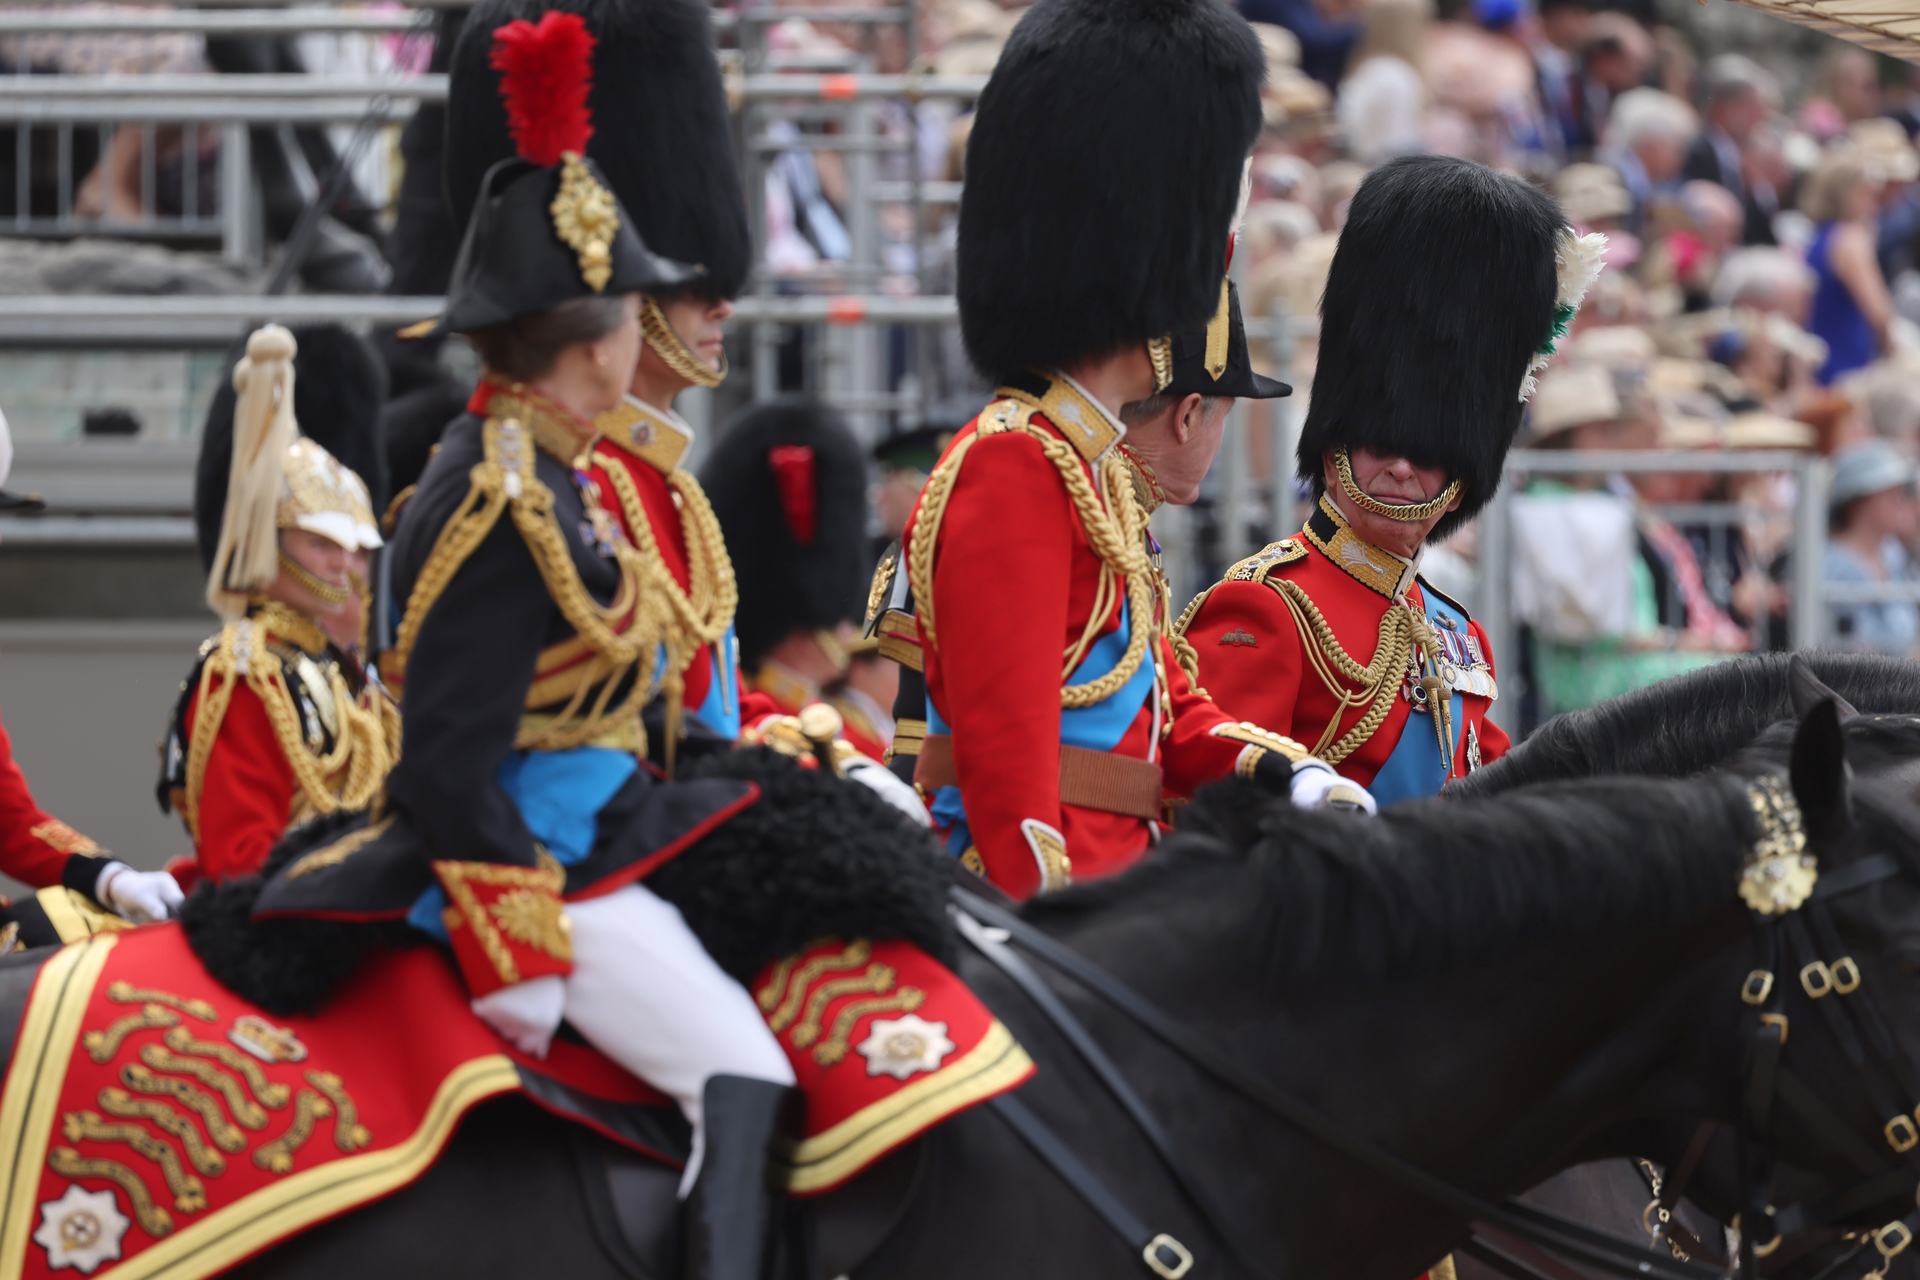 Pictured: The Royal Family on horseback at Horseguards during Trooping the Colour for The King's Birthday Parade.